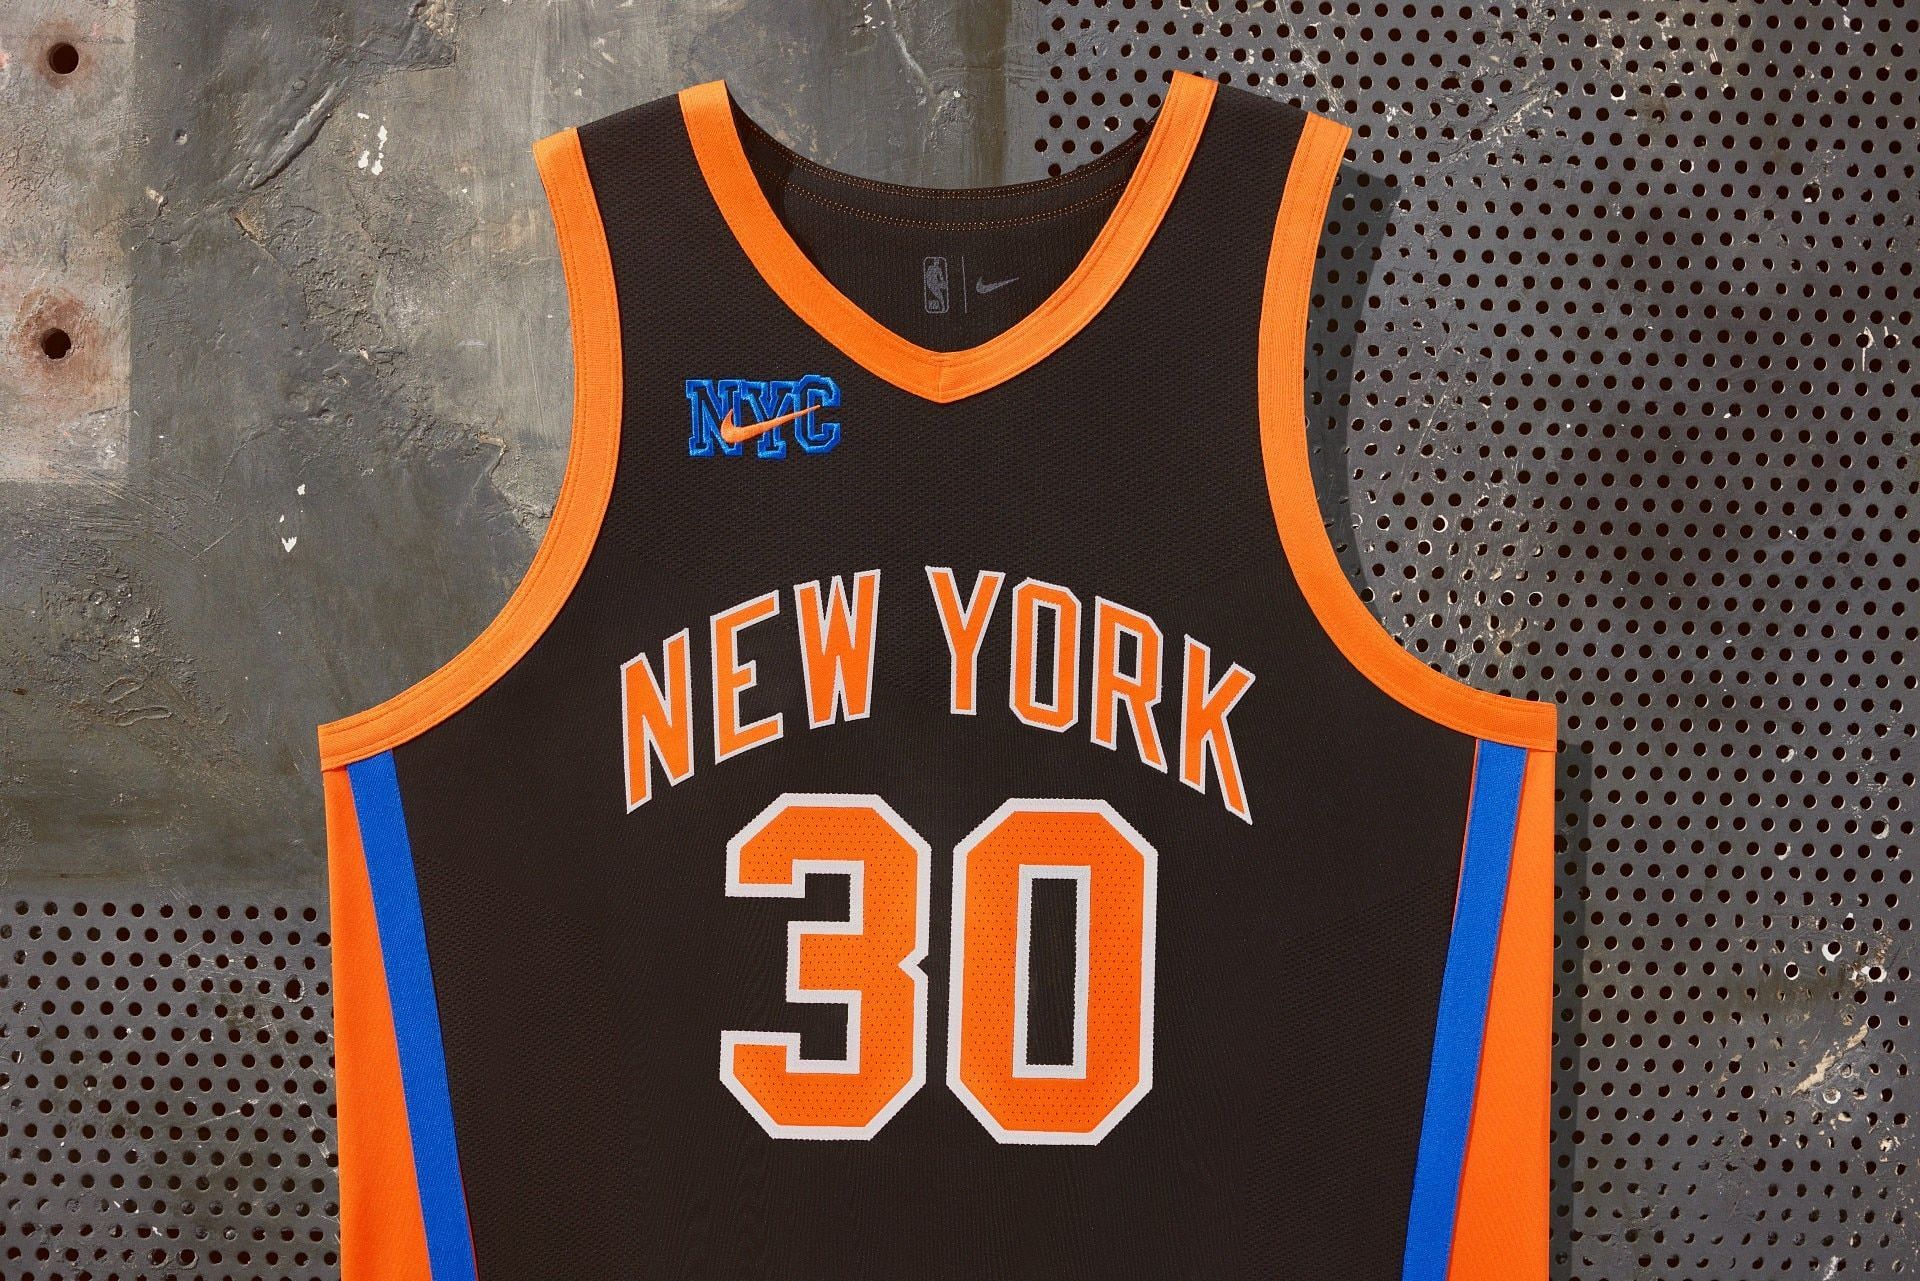 Nike NBA City Edition jerseys: Ranking the five best and five